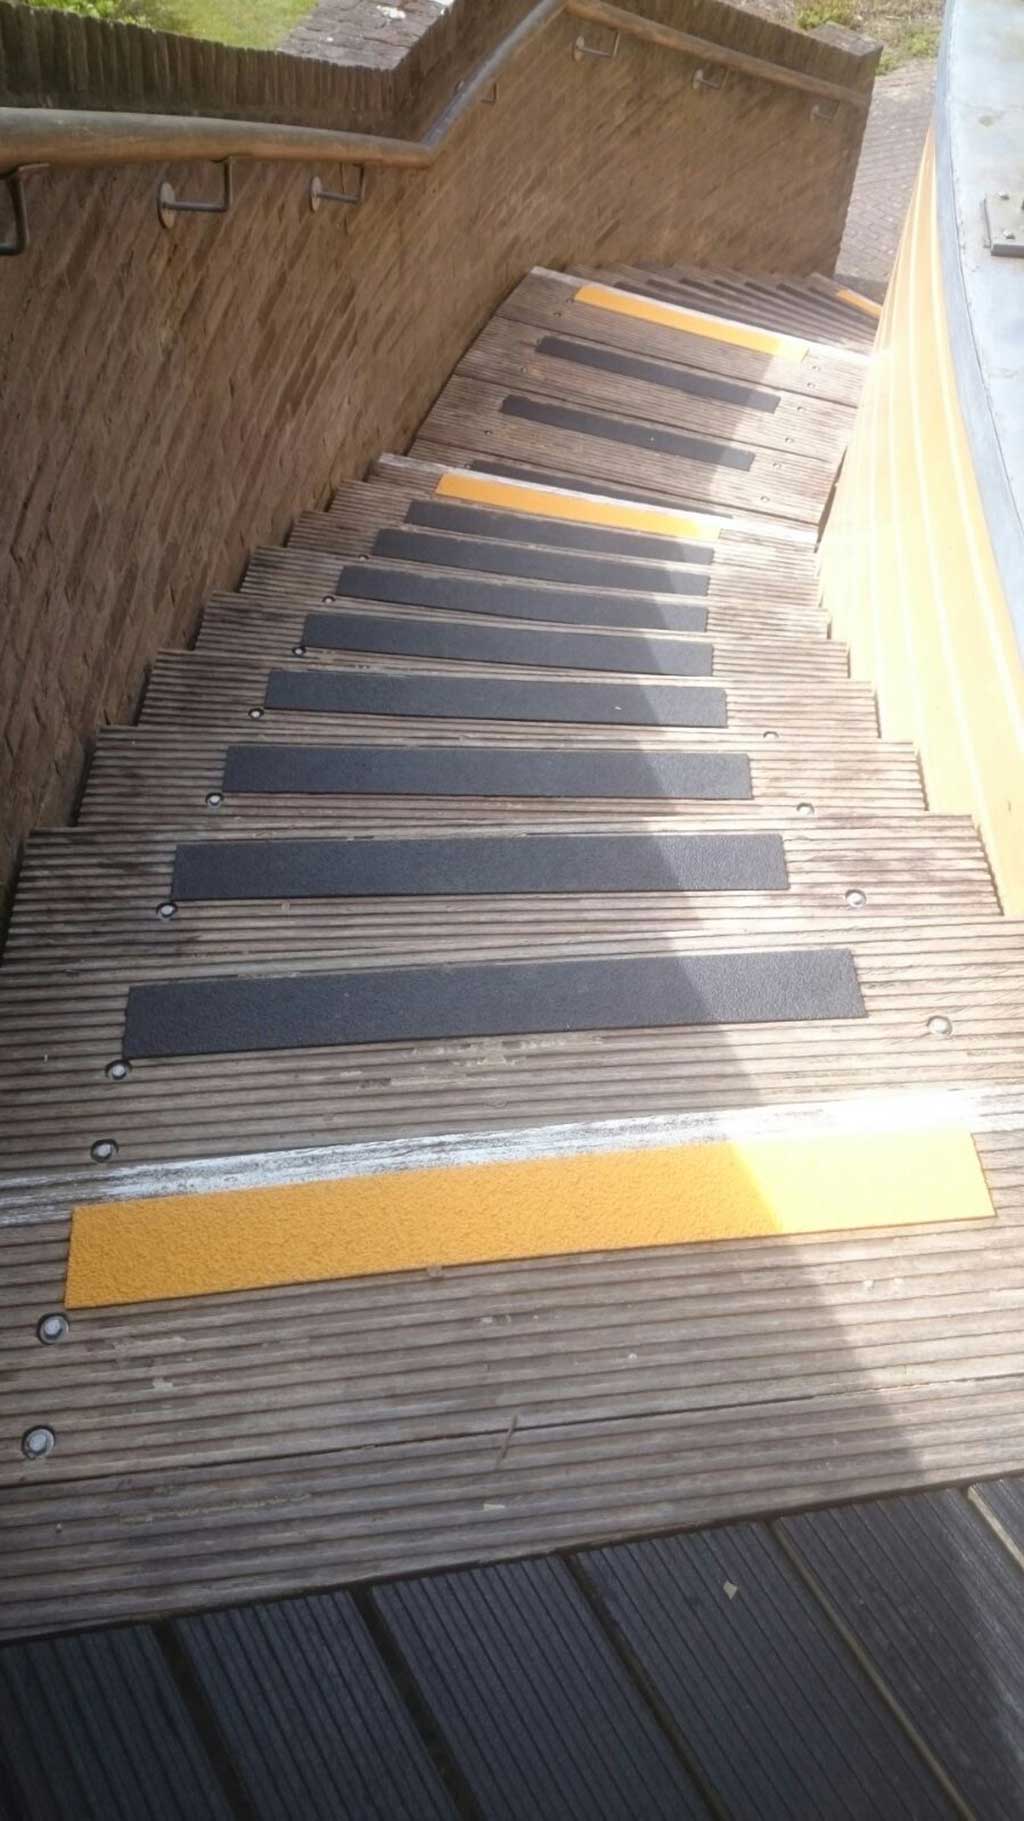 Yellow and Black Non Skid Tread for Stairs 2 Inch x 60 Foot Steps Indoor and Outdoor Use Floors Bligo Anti Slip Safety Grip Tape